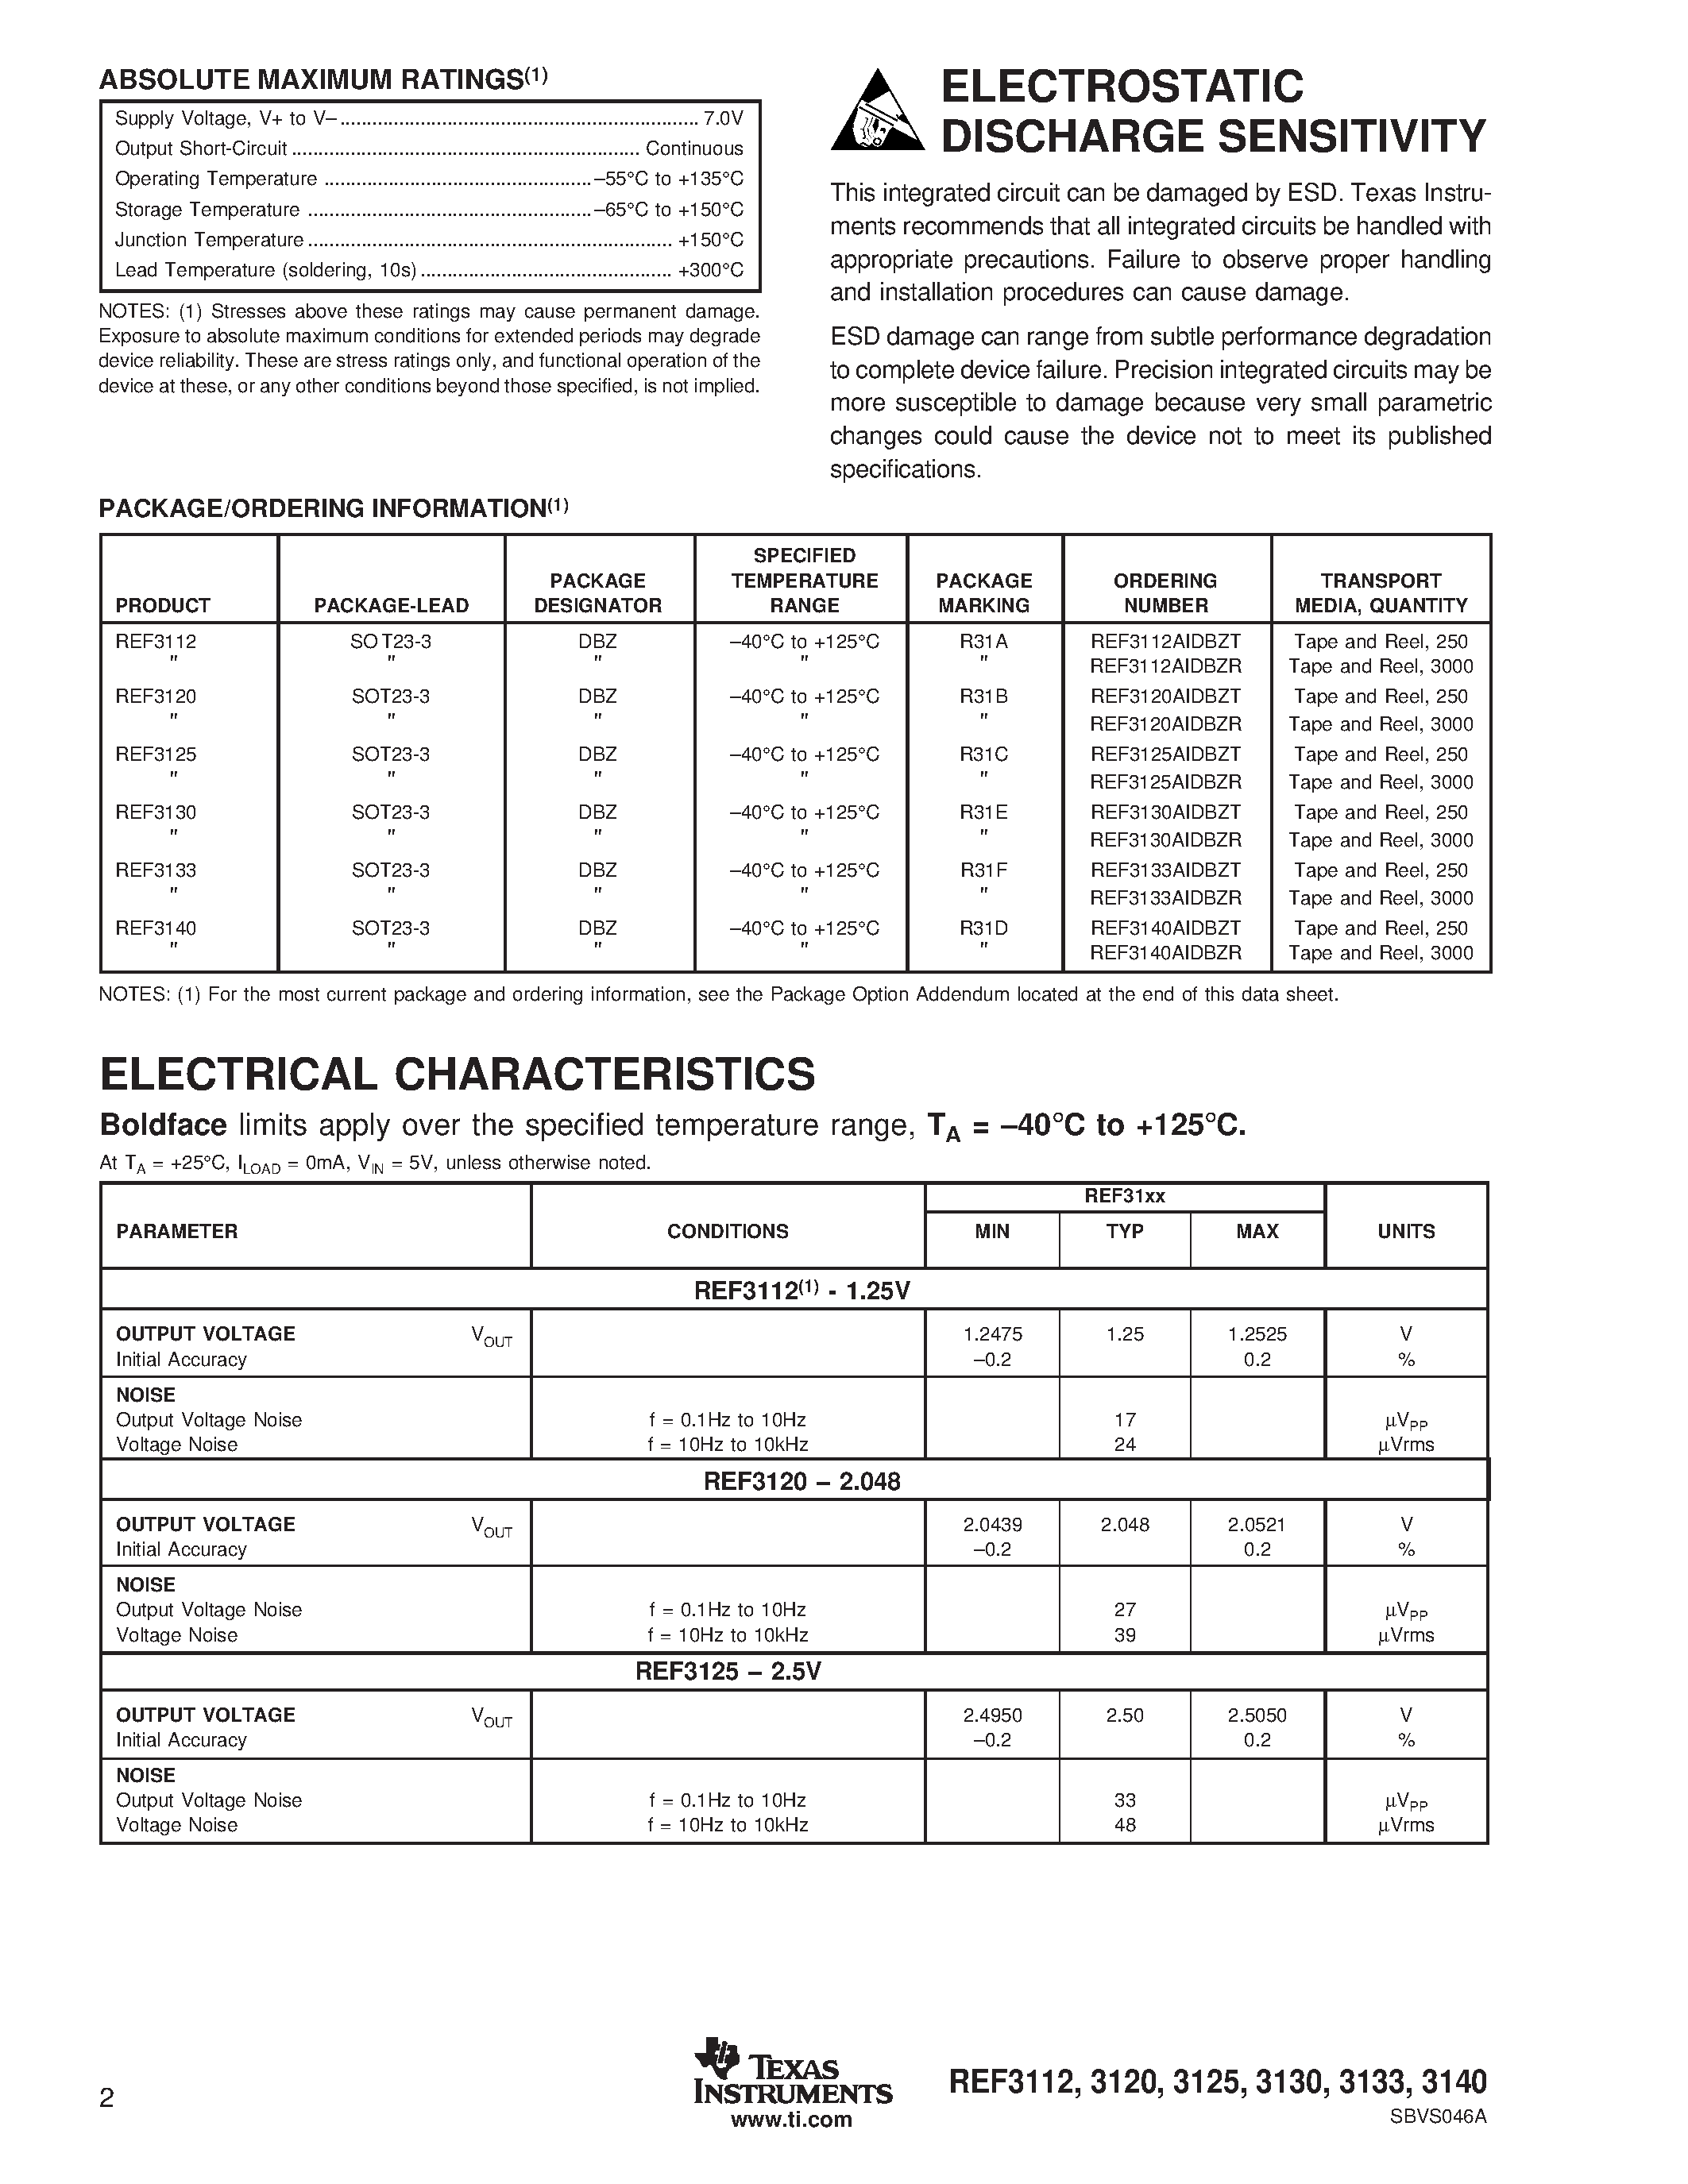 Datasheet REF3140AIDBZT - 15ppm/C Max/ 100UA/ SOT23-3 SERIES VOLTAGE REFERENCE page 2